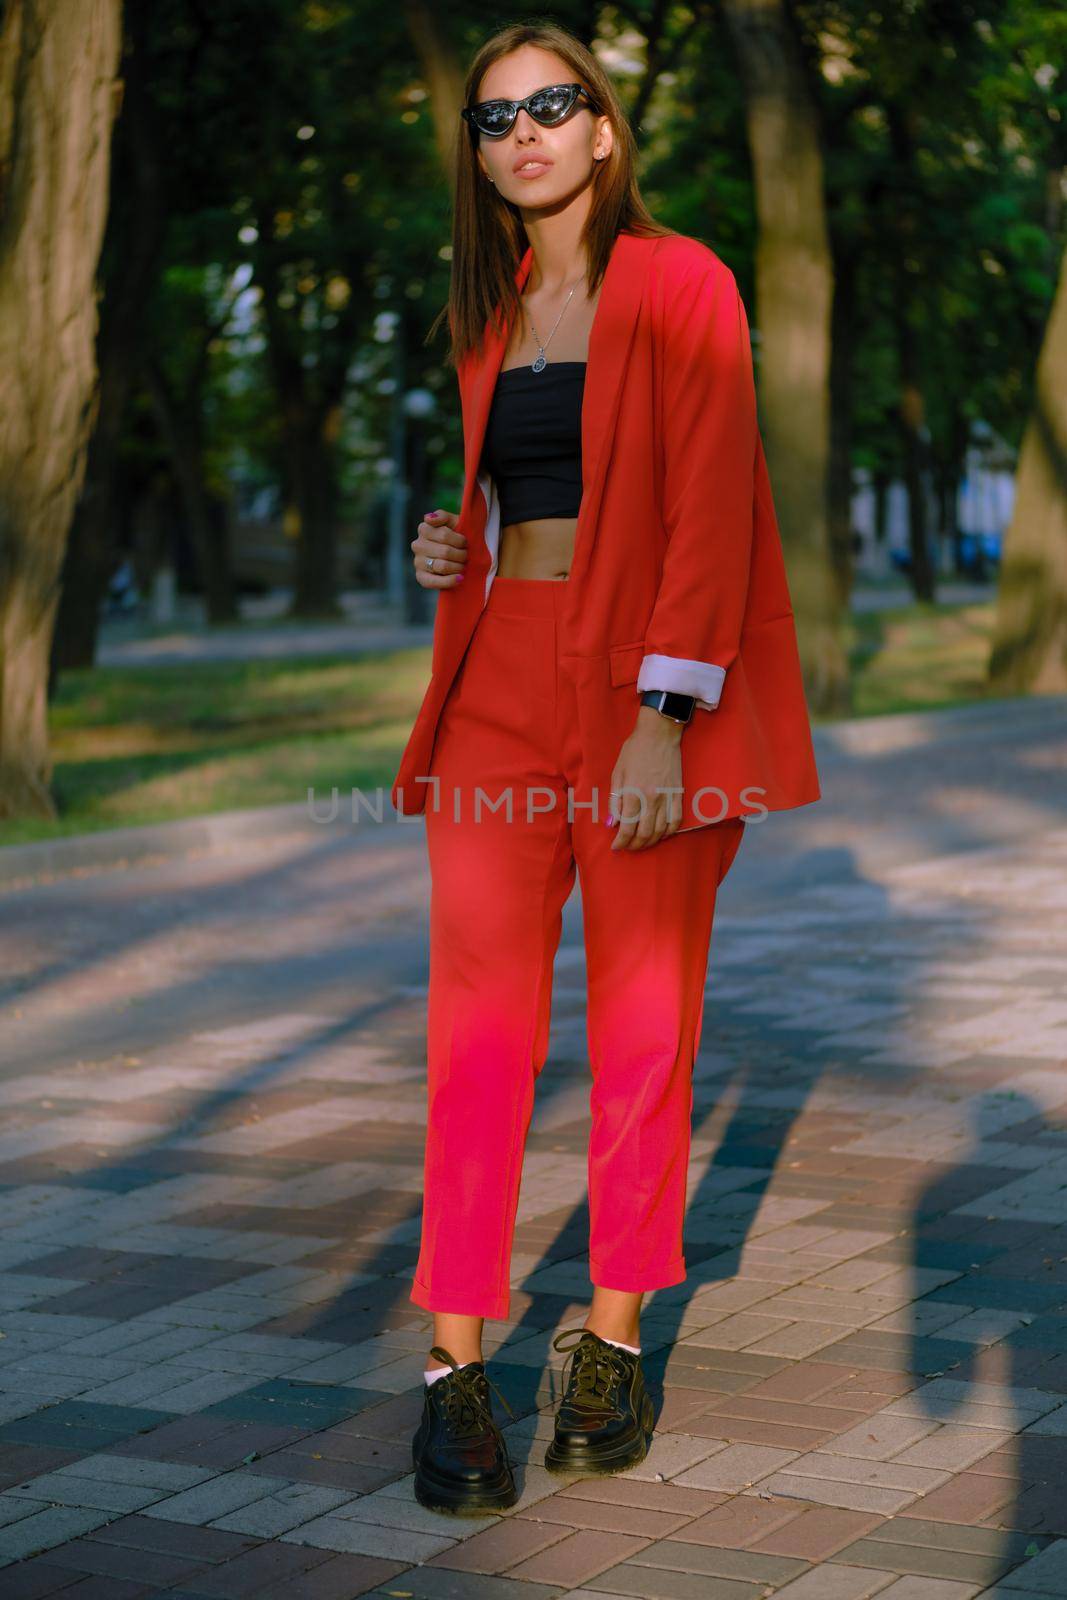 Wonderful blonde maiden in a red lady-type pantsuit and black top, boots, watch, ring, sunglasses, with a pendant around her neck is walking alone in the city. The concept of fashion and style. Full-length shot.